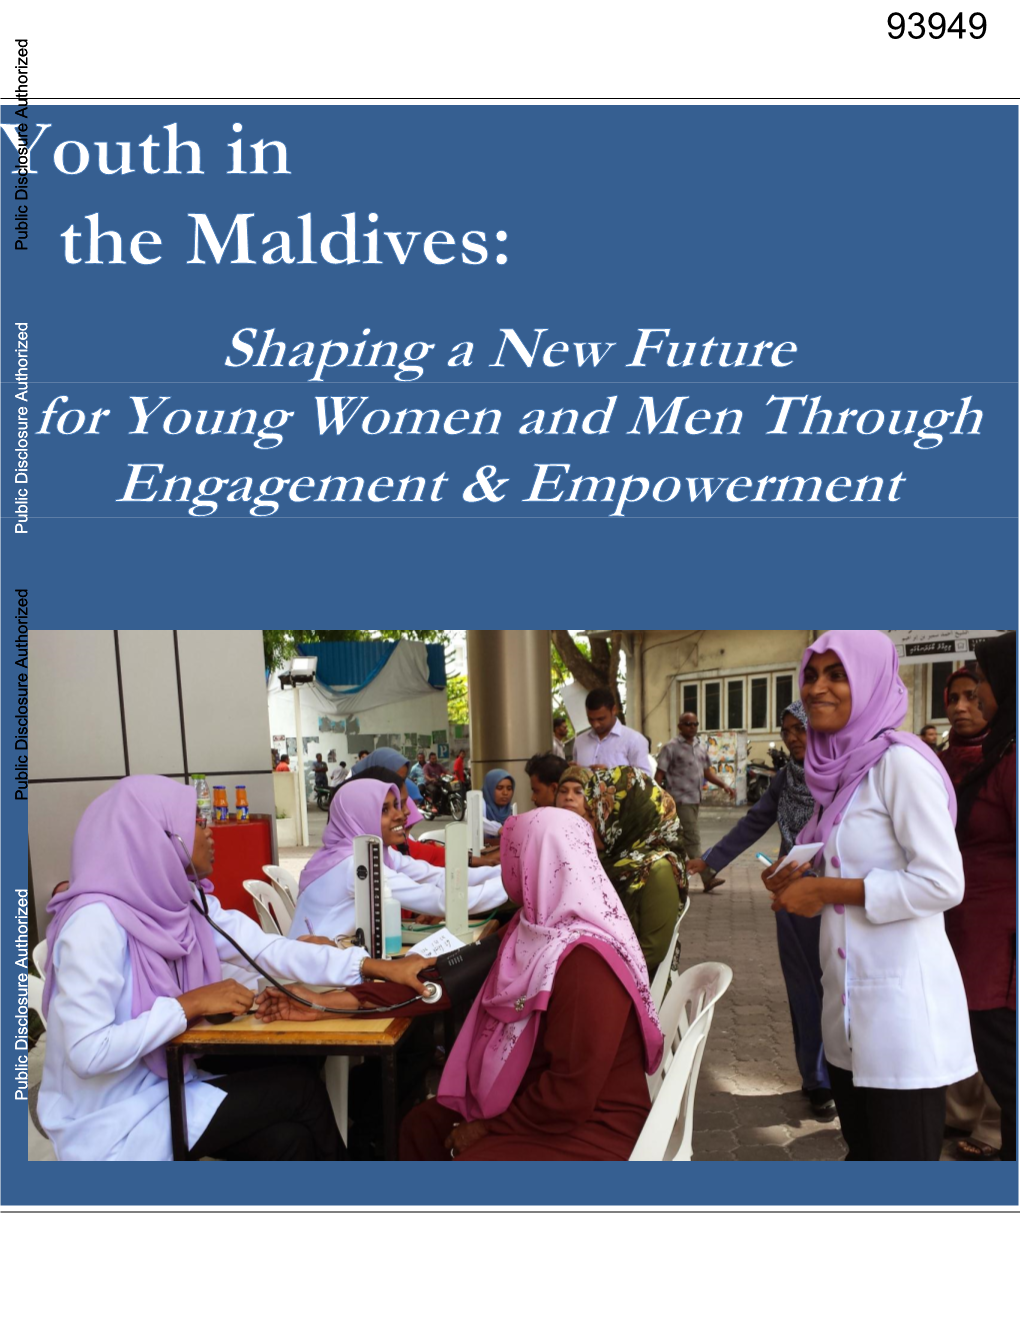 Youth in the Maldives: Shaping a New Future for Young Women and Men Through Engagement and Empowerment